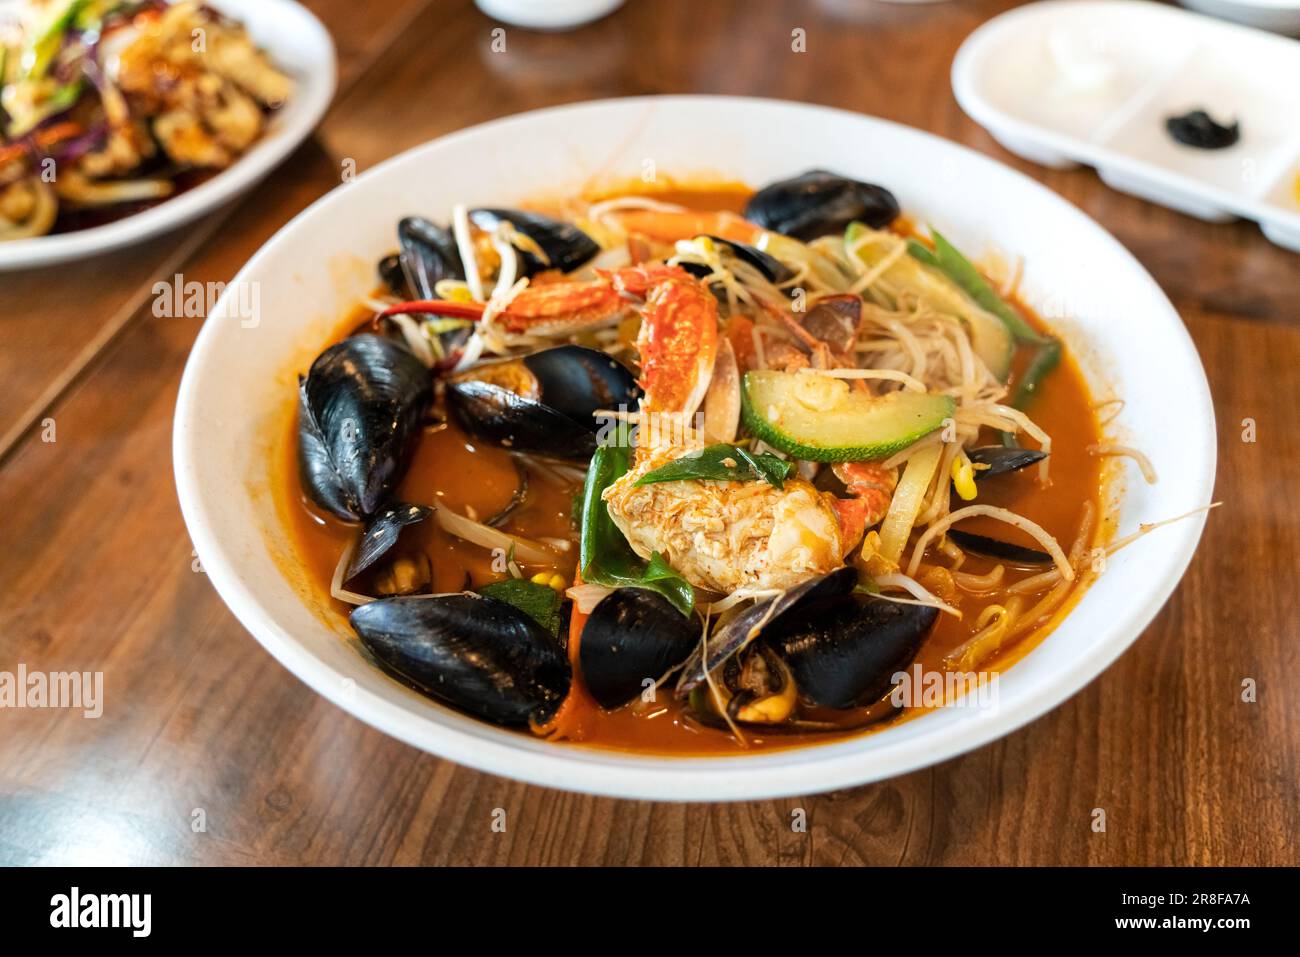 Delicious jjamppong, jjambbong, Chinese-style Korean noodle soup topped with red, spicy seafood and kimchi broth in South Korea. Stock Photo